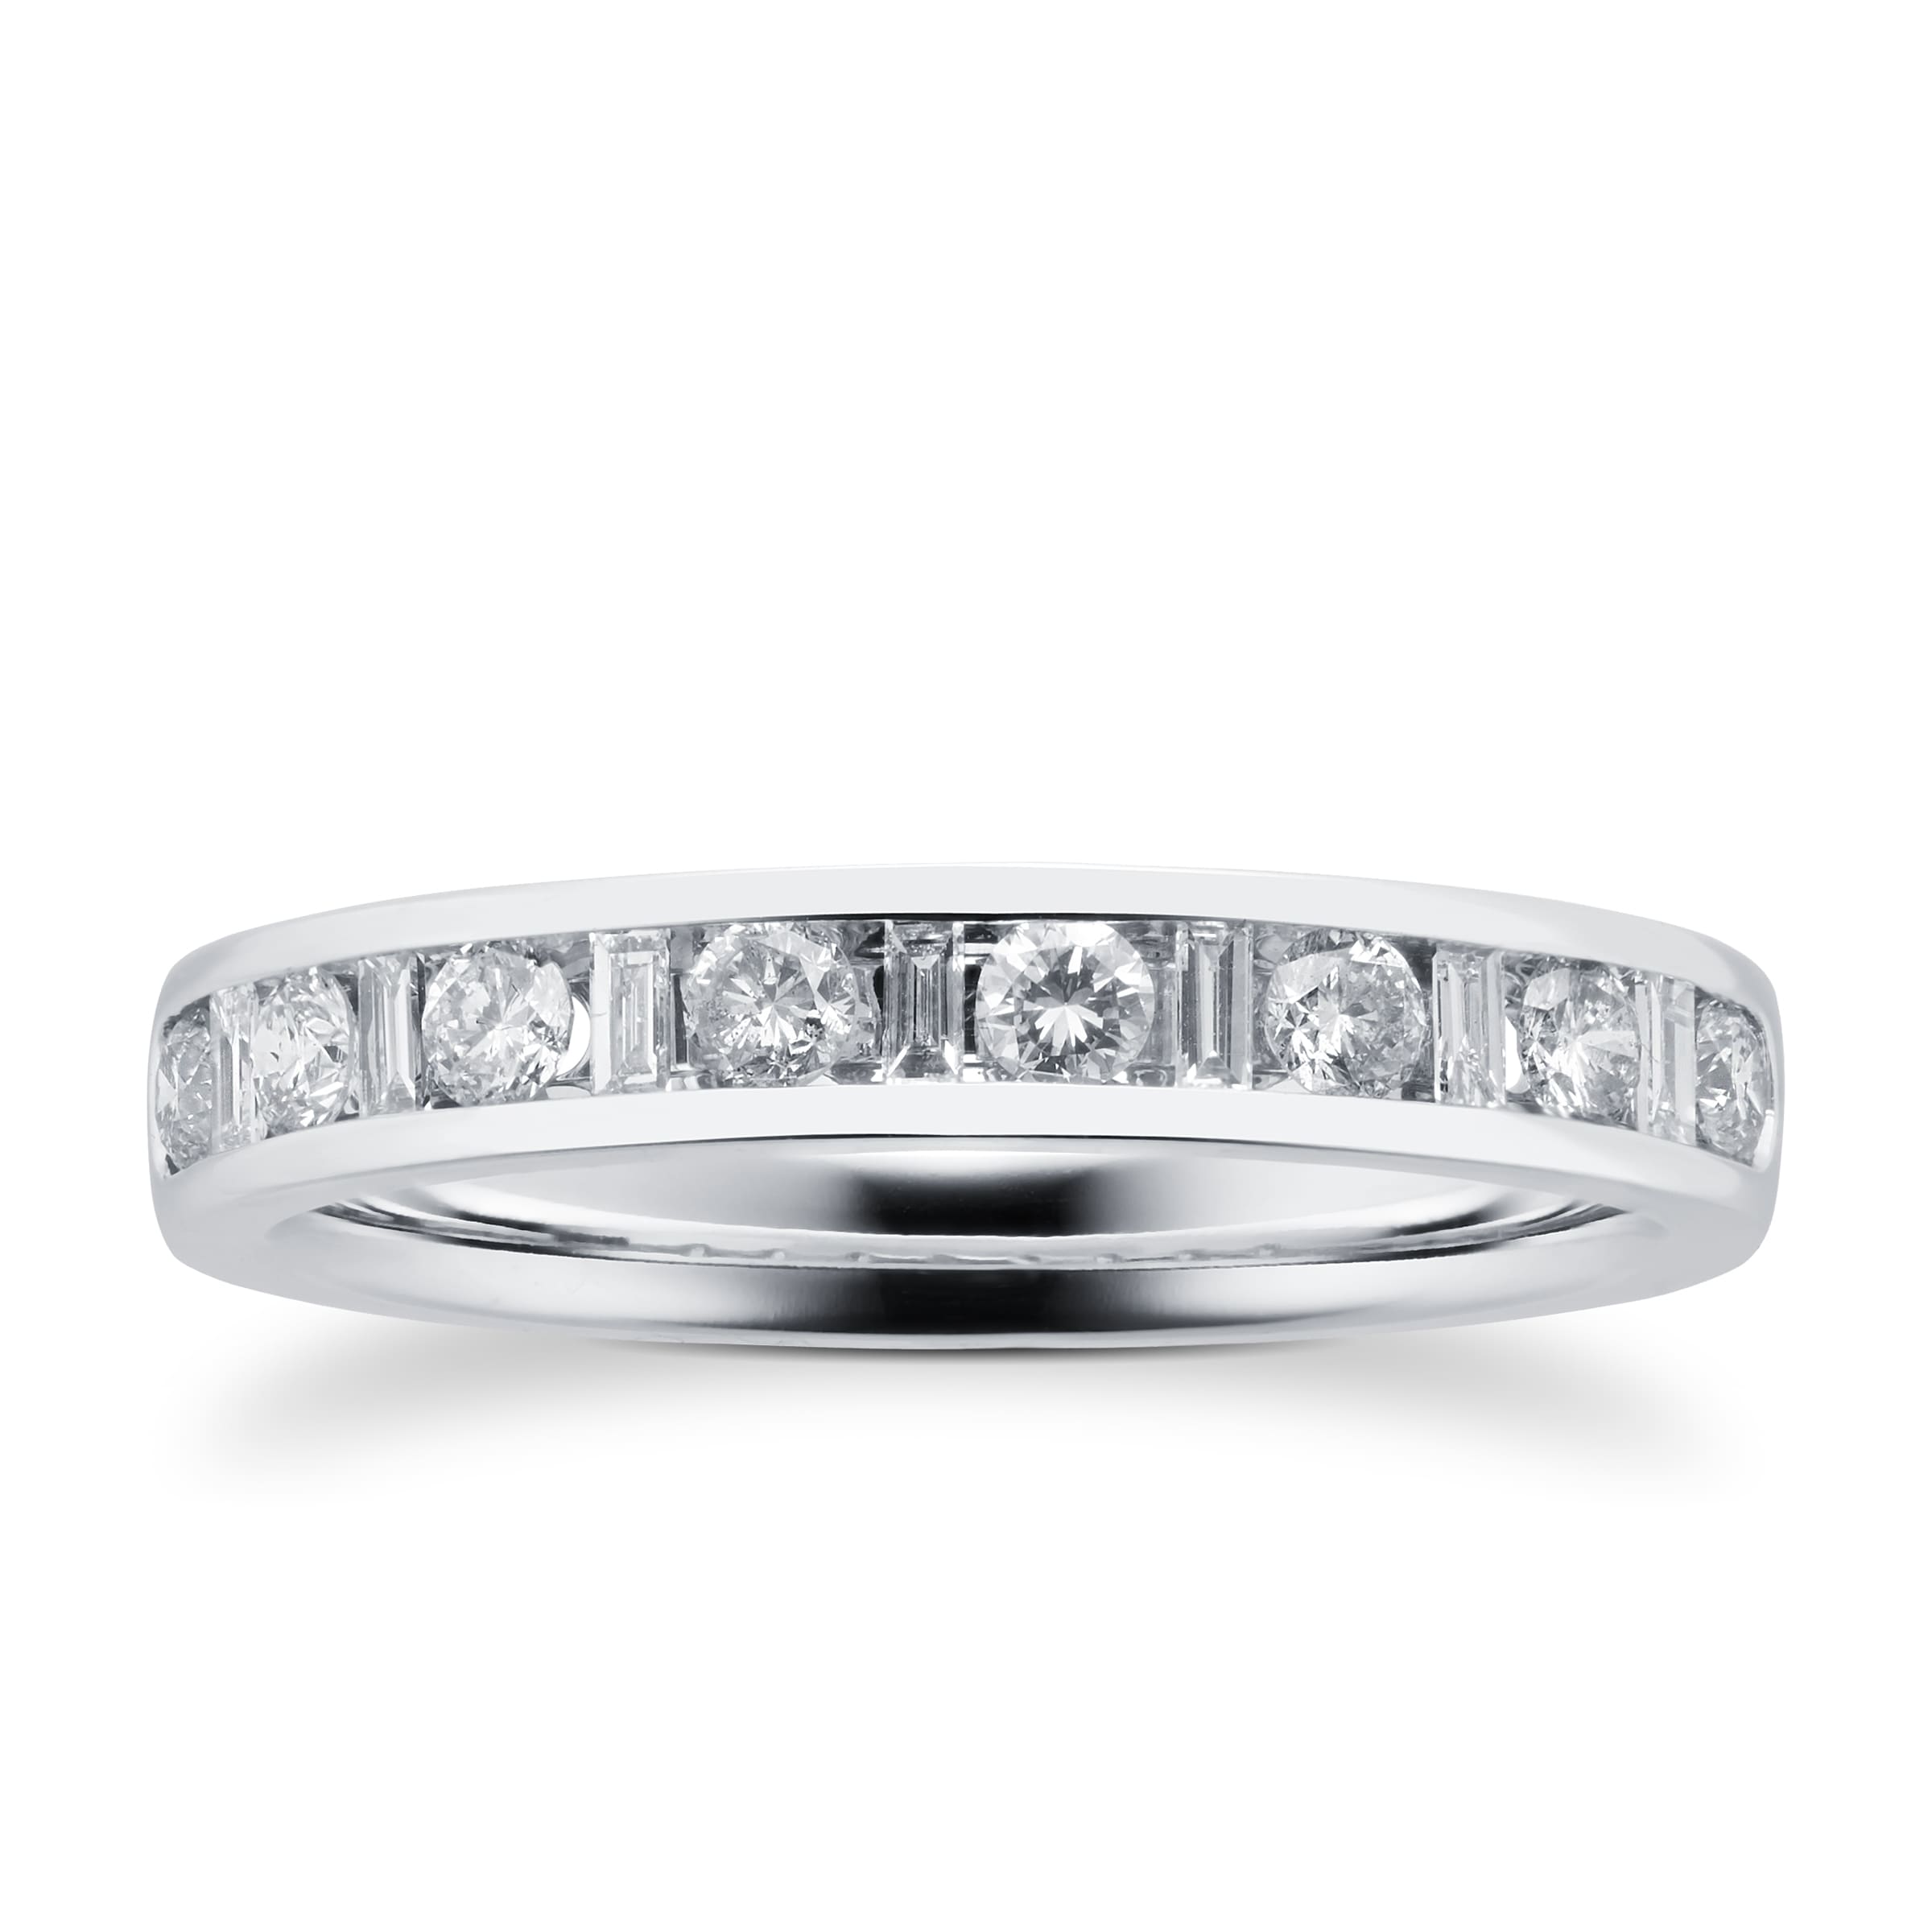 Baguette And Brilliant Cut 050 Carat Total Weight Diamond Half Eternity Ring In 18 Carat White Gold Ring Size N